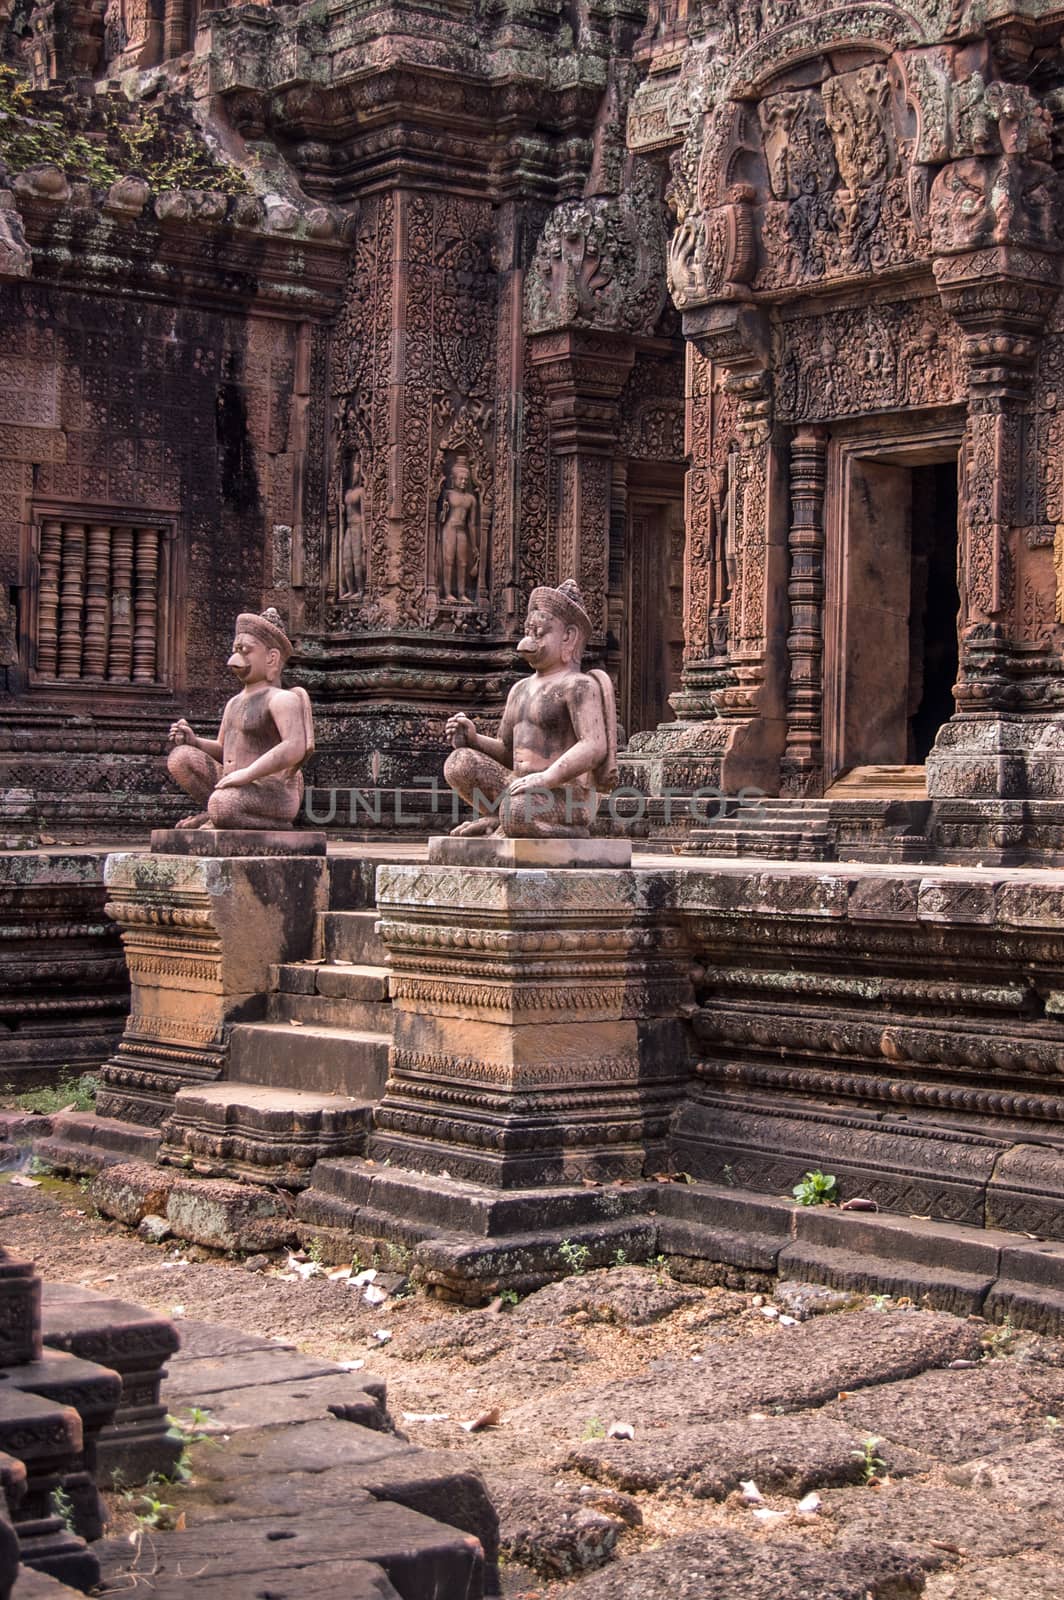 Statues of guardians outside the entrance to a chapel at Banteay Srei temple, Angkor, Cambodia.